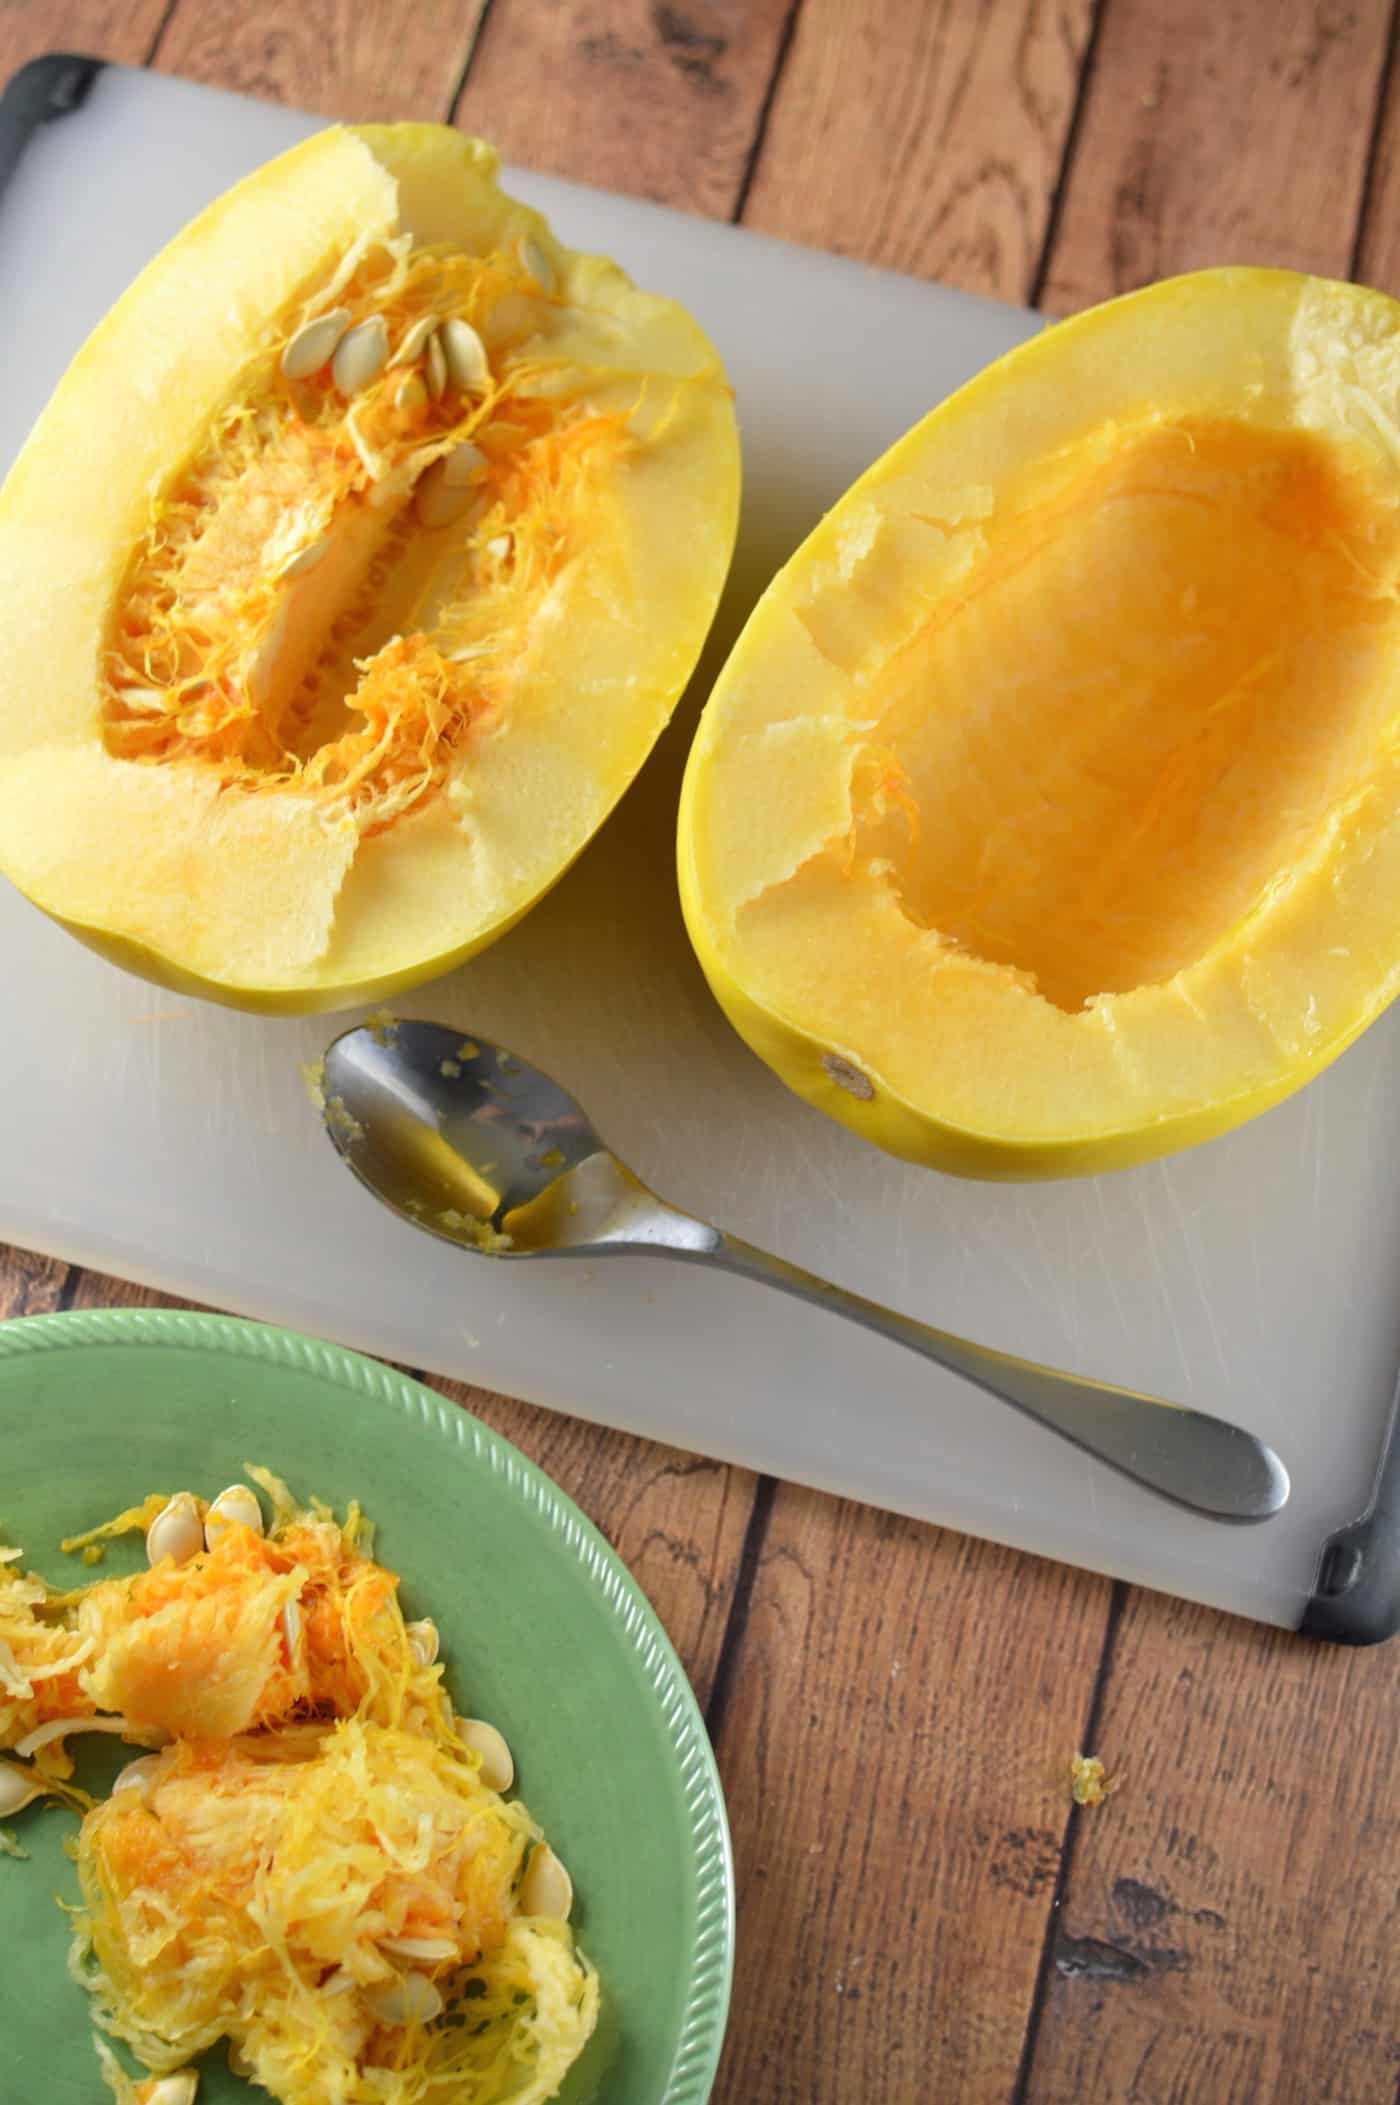 Scooping the guts and seeds out of a spaghetti squash with a spoon